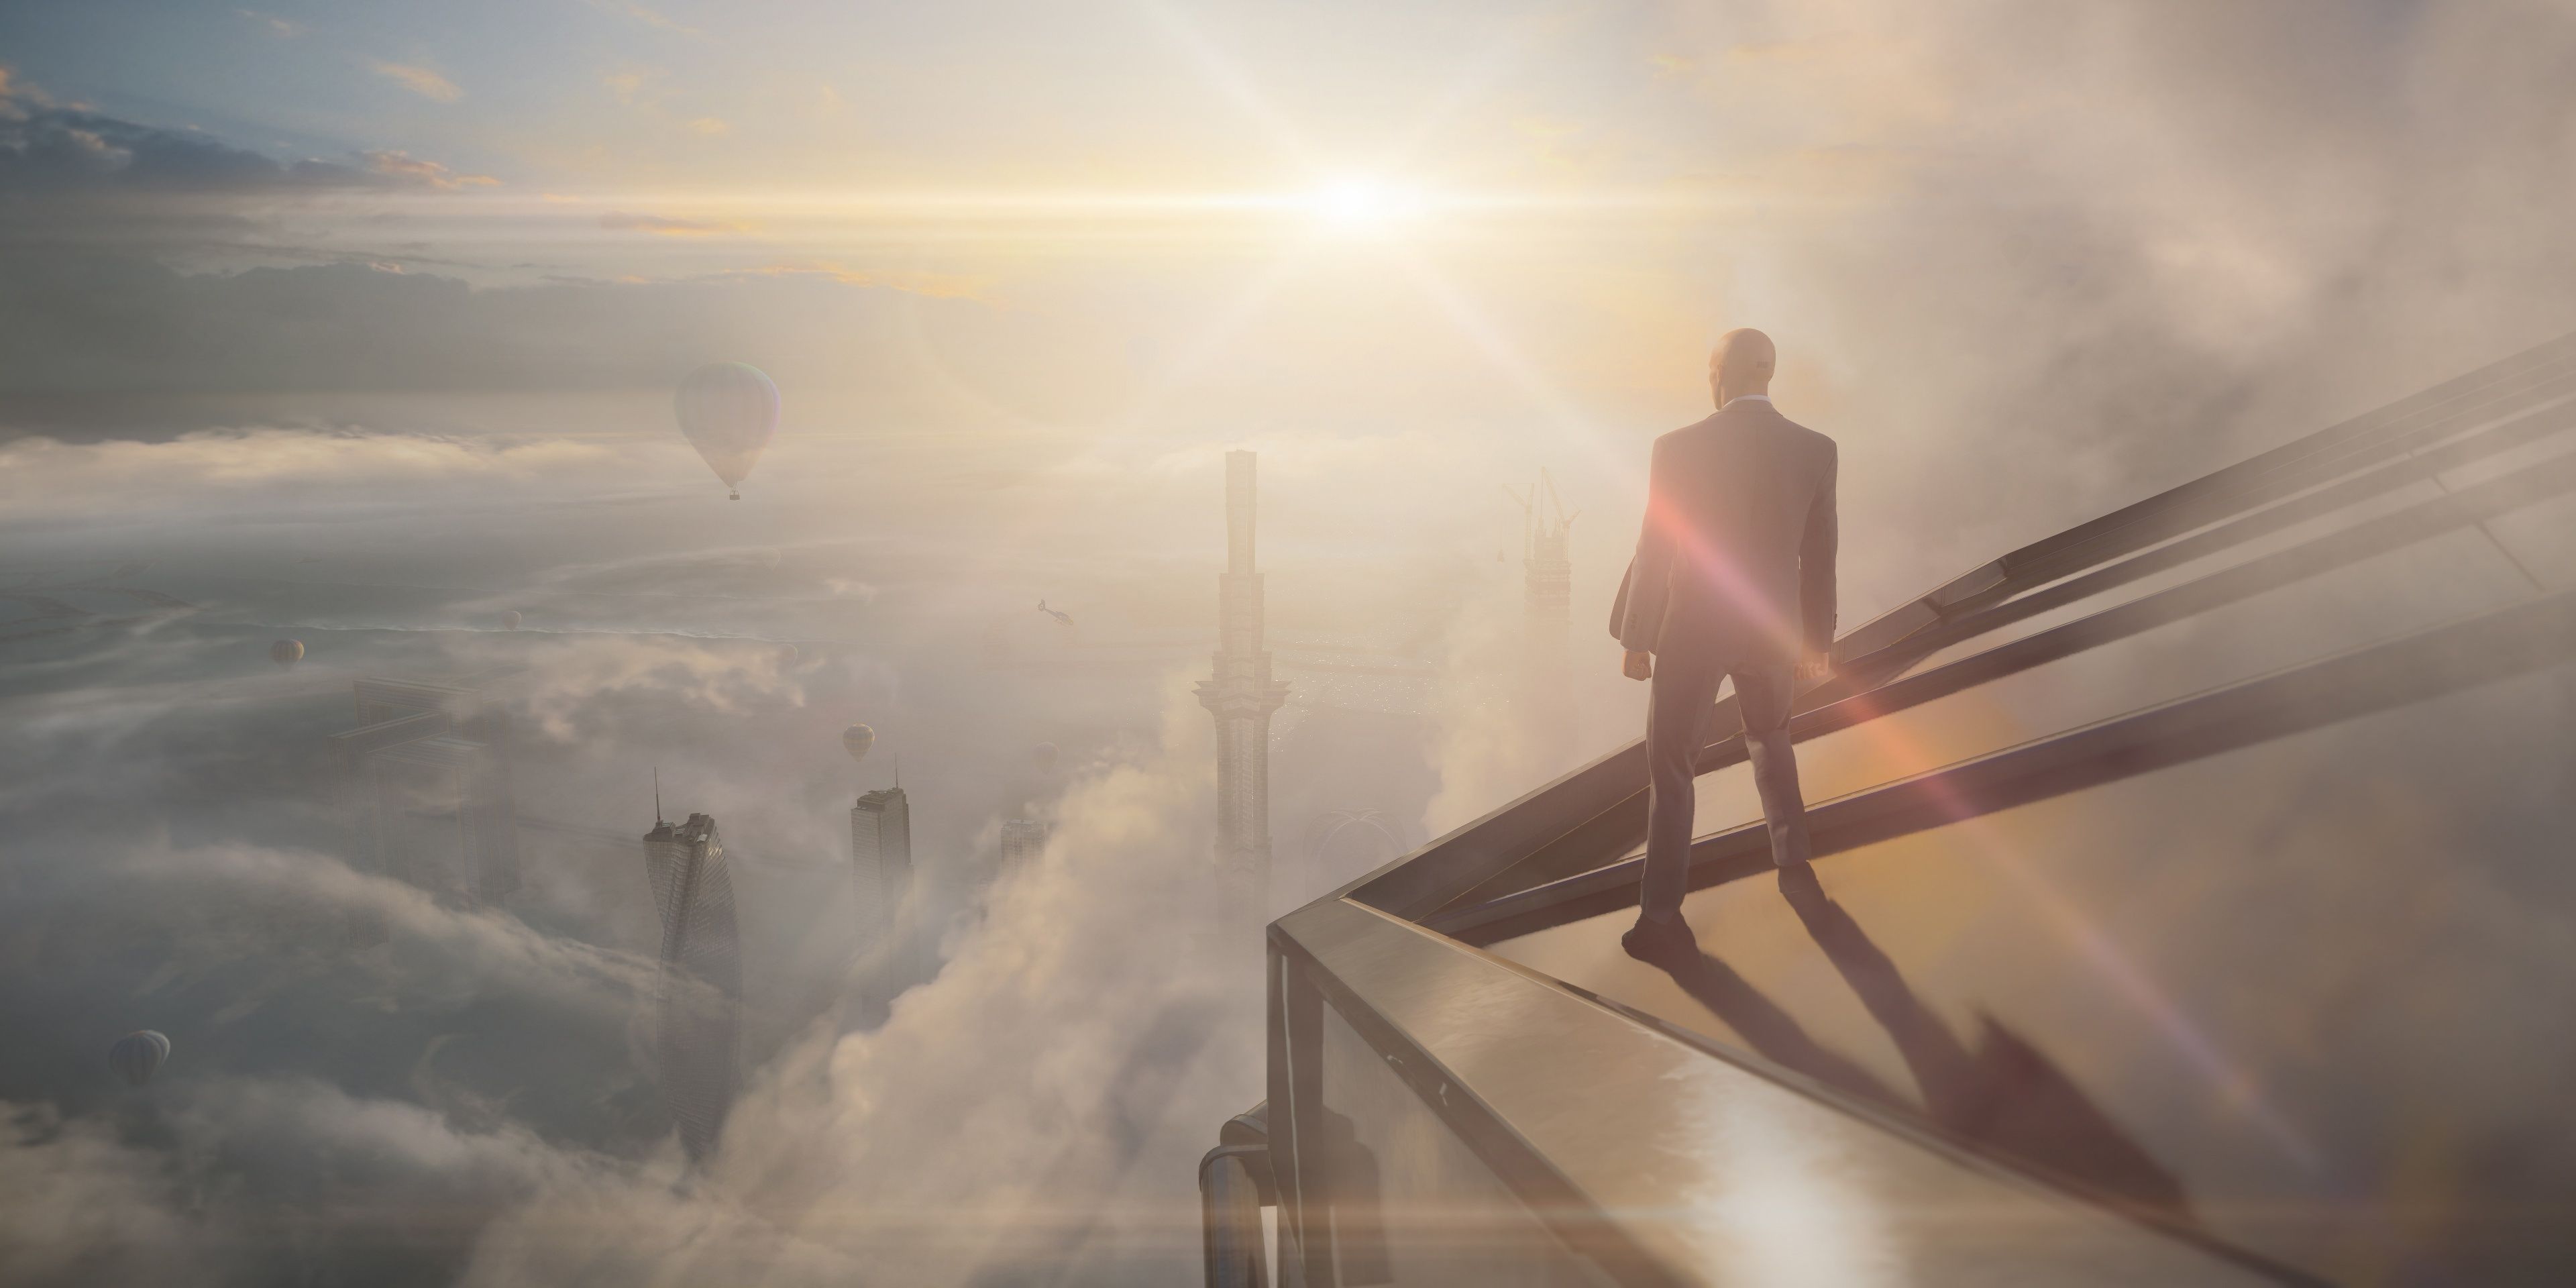 A screenshot showing Agent 47 standing on the edge of a rooftop in Hitman 3